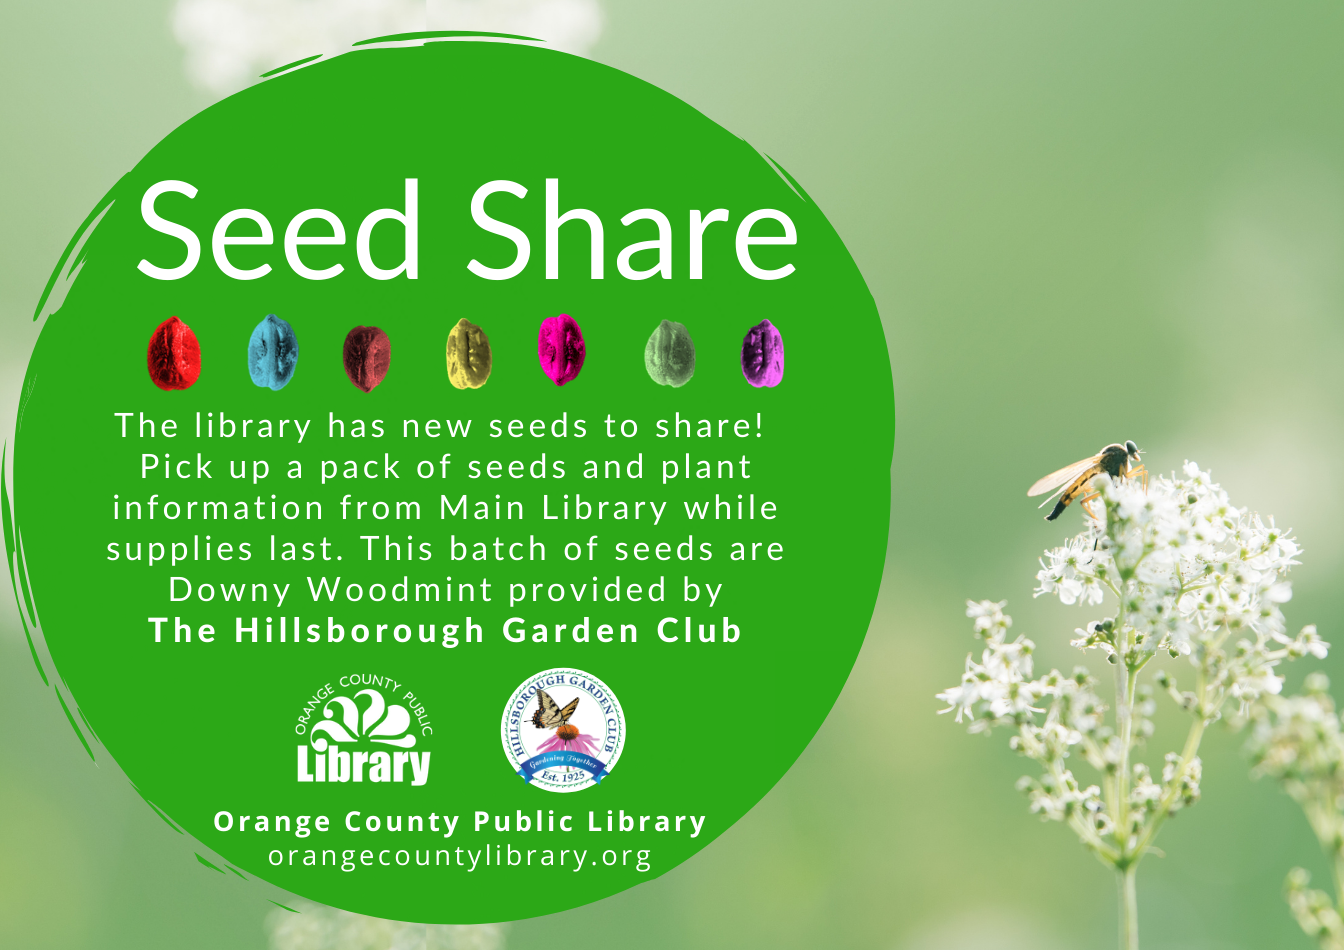 Seed Share information for May 2022 reads: "The library has new seeds to share! Pick up a pack of seeds and plant information from Main Library while supplies last. This batch of seeds are Downy Woodmint (Blephilia ciliate) provided by The Hillsborough Garden Club."